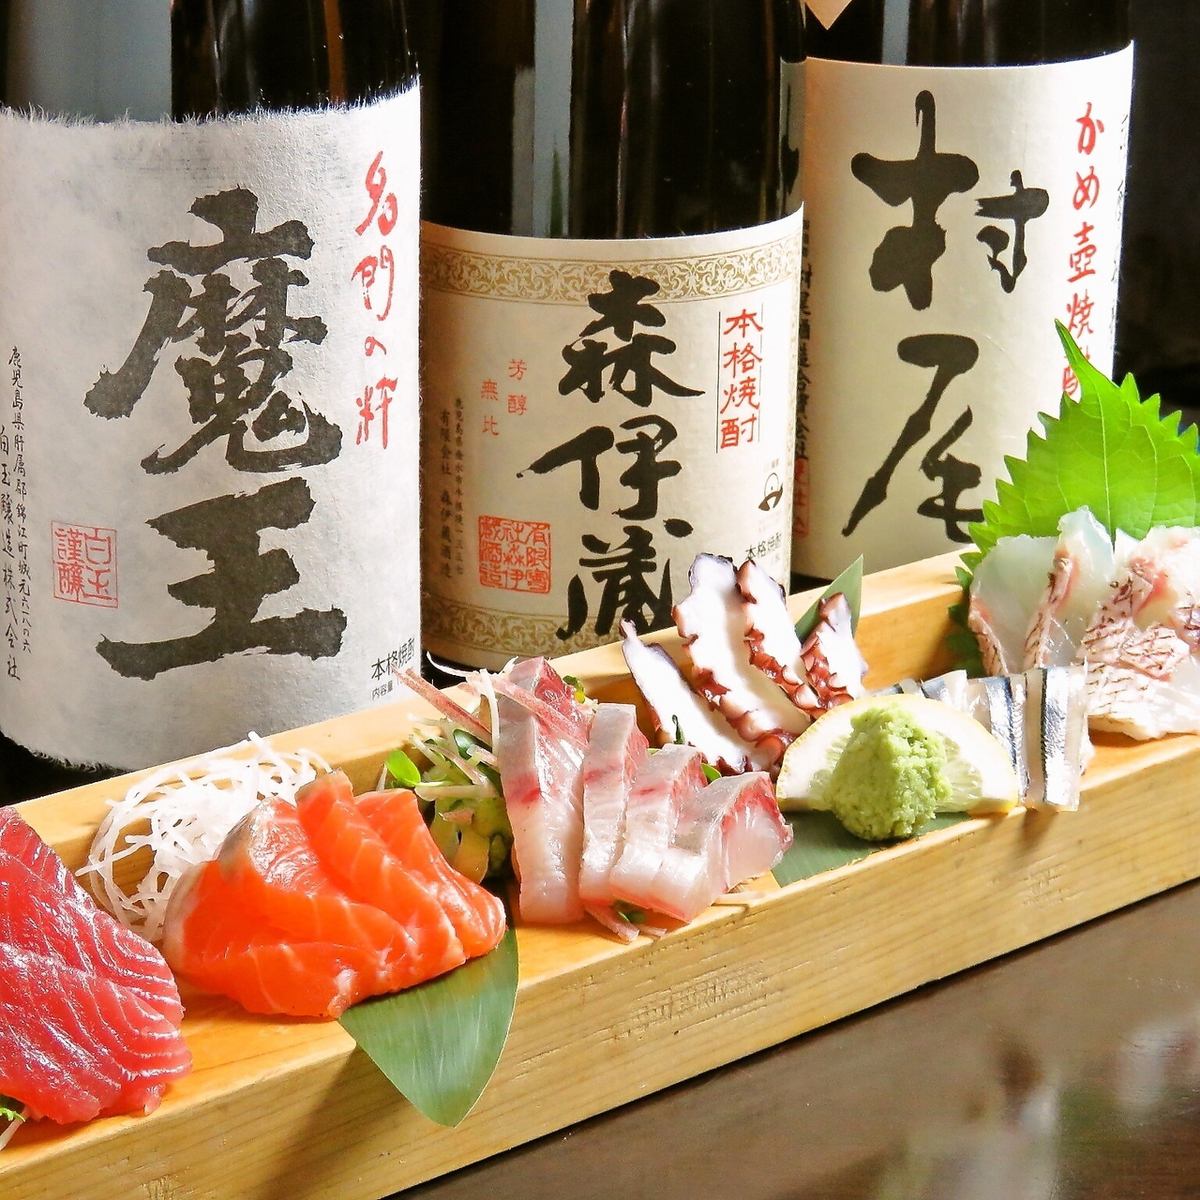 Enjoy an adult banquet with fish and famous sake♪